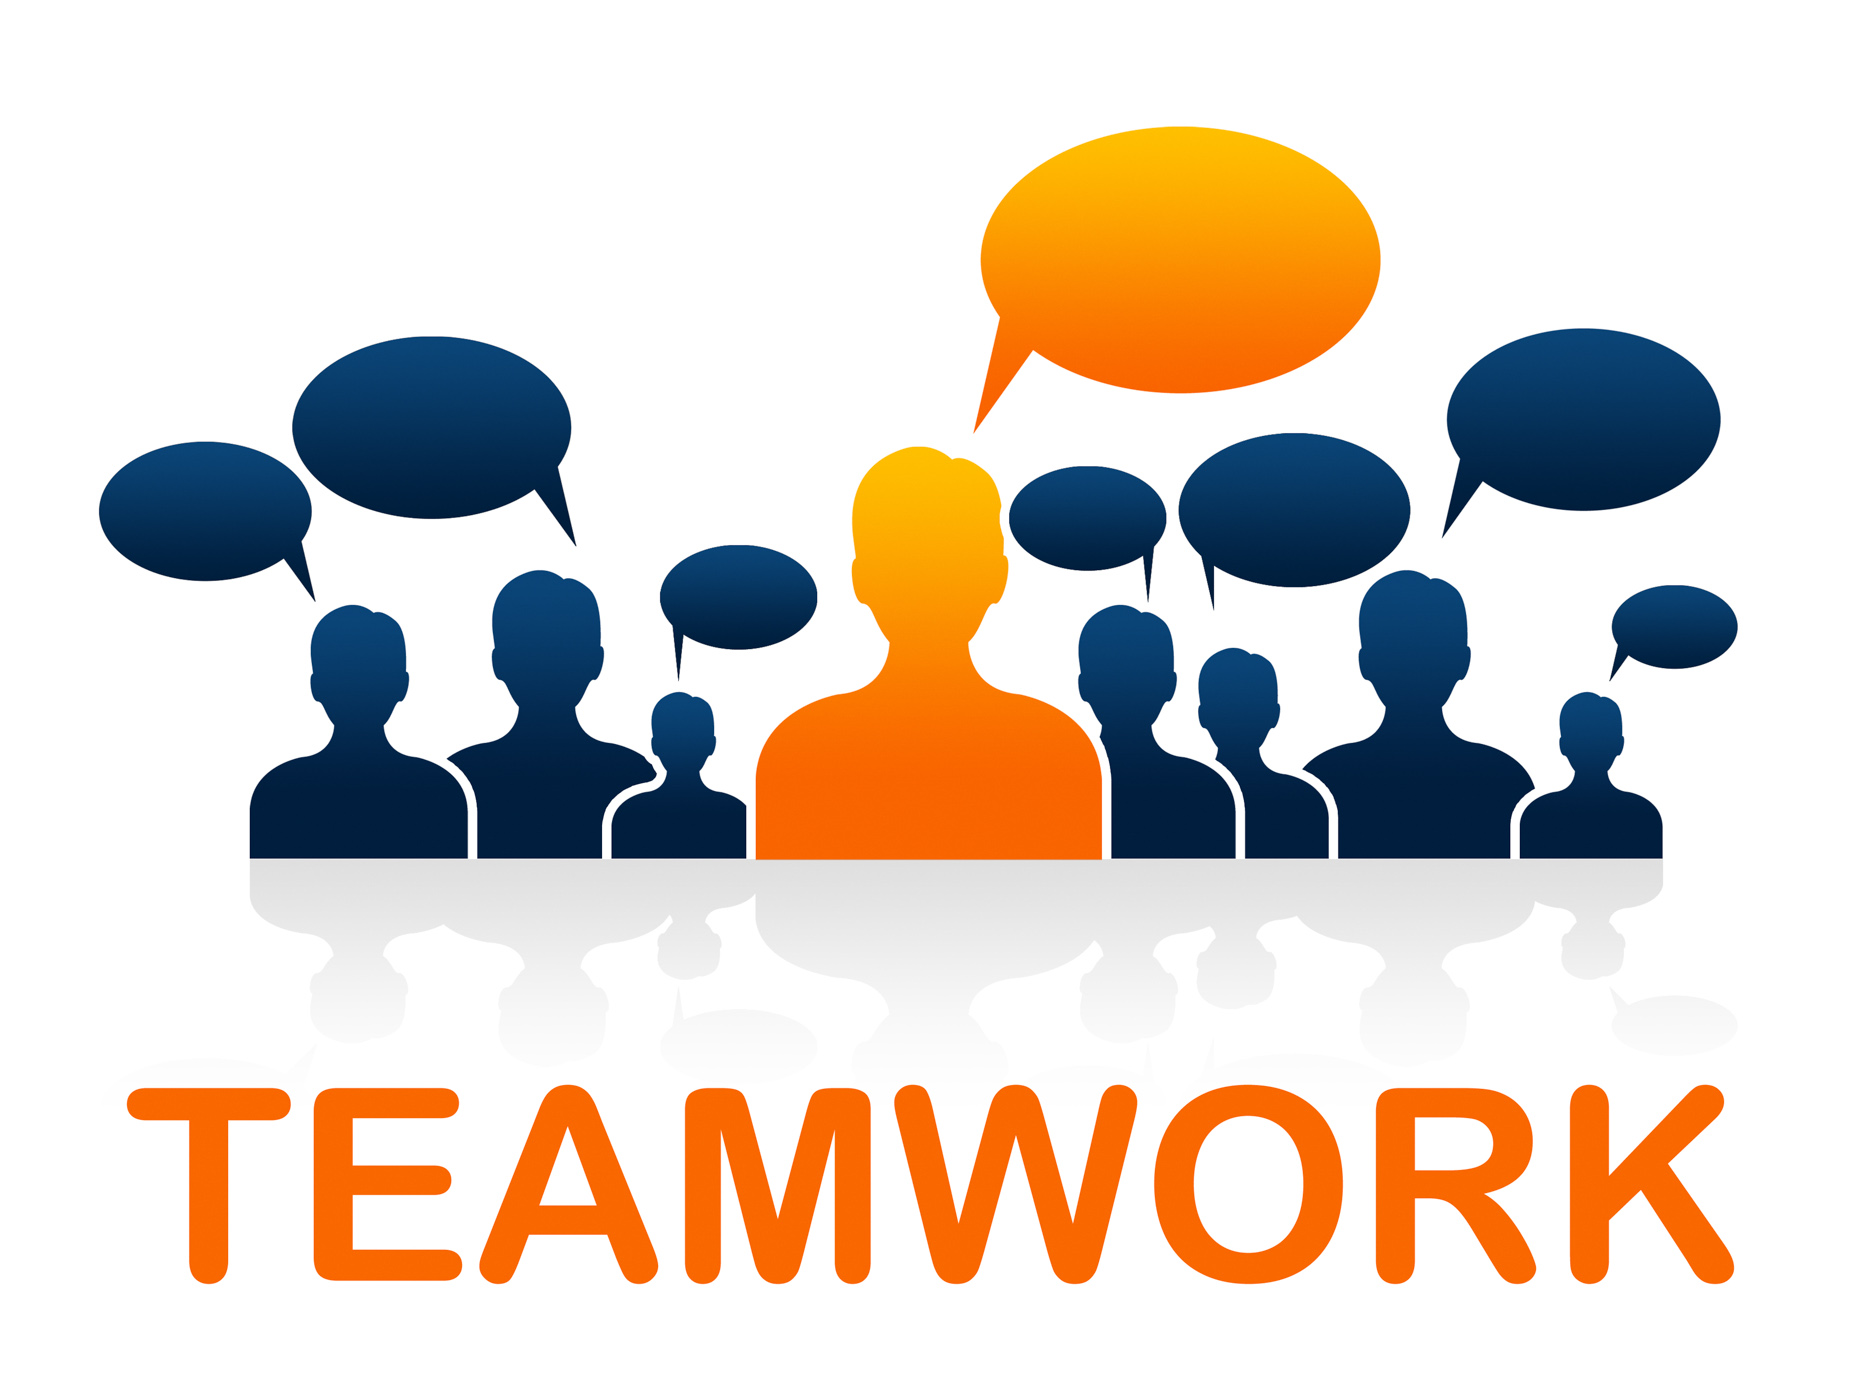 Team Teamwork Means Cooperating Ally And Cooperate, Agreement, Organization, Unit, Union, HQ Photo